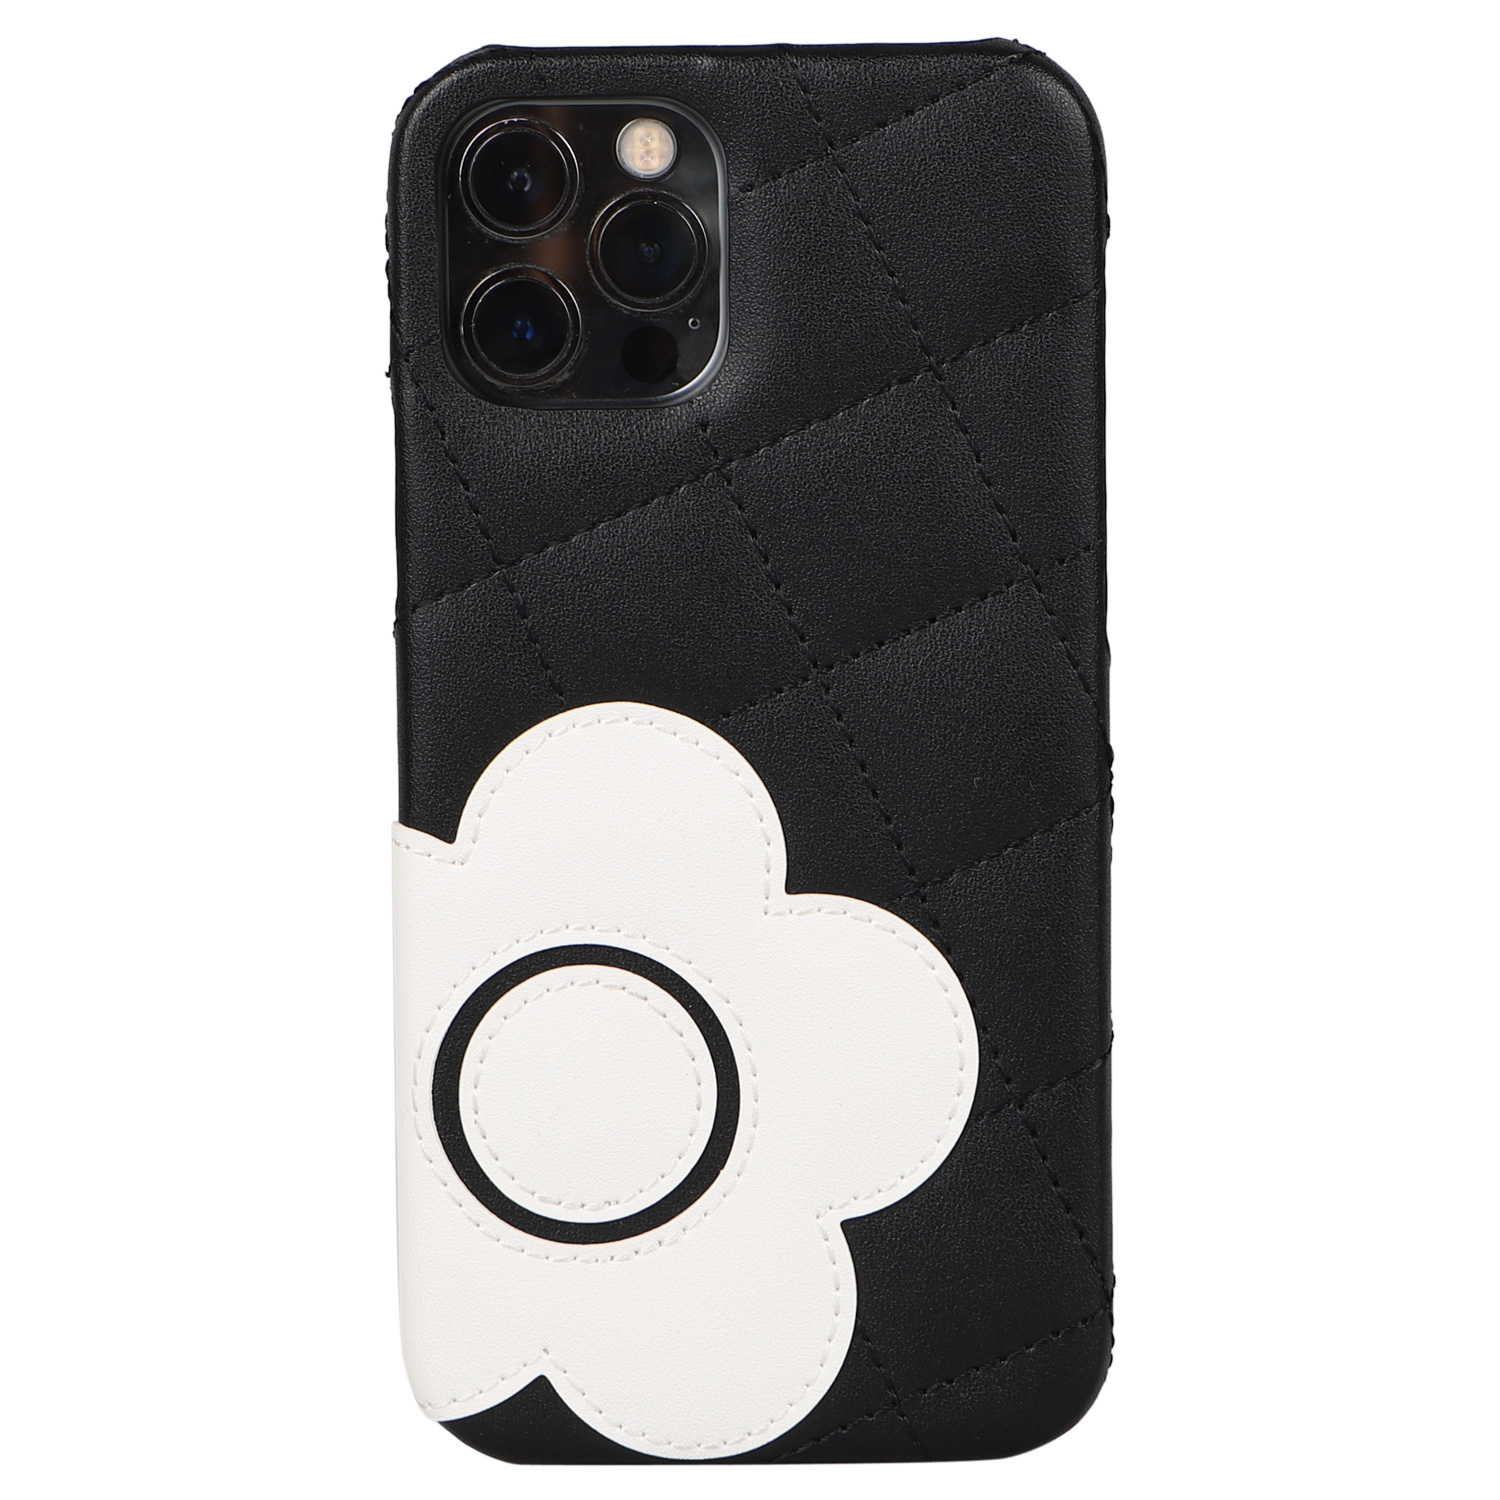 MARY QUANT マリークヮント iPhone 12 12 Pro ケース スマホ 携帯 レディース マリクワ PU QUILT LEATHER BACK CASE IP12-MQ03｜sneak｜02